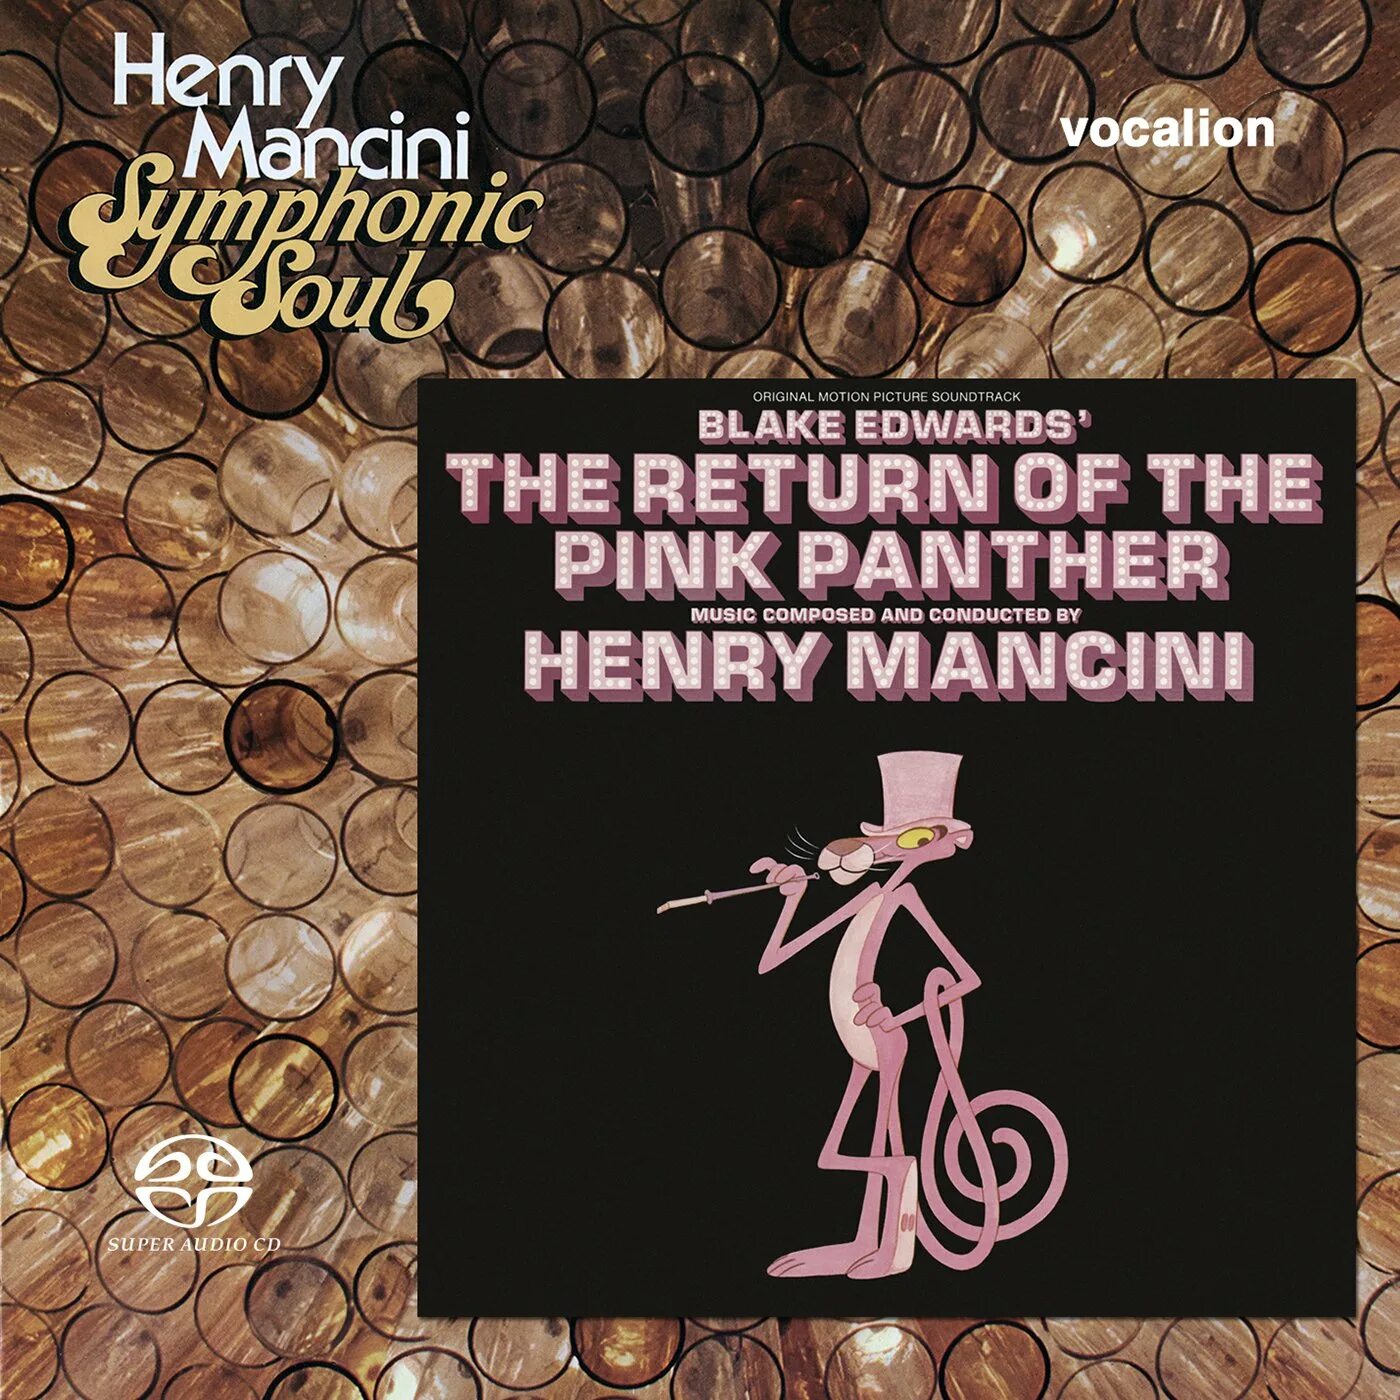 Henry Mancini - Return of the Pink Panther. Mancini - Pink Panther. Henry Mancini - Symphonic Soul. Henry mancini the pink panther